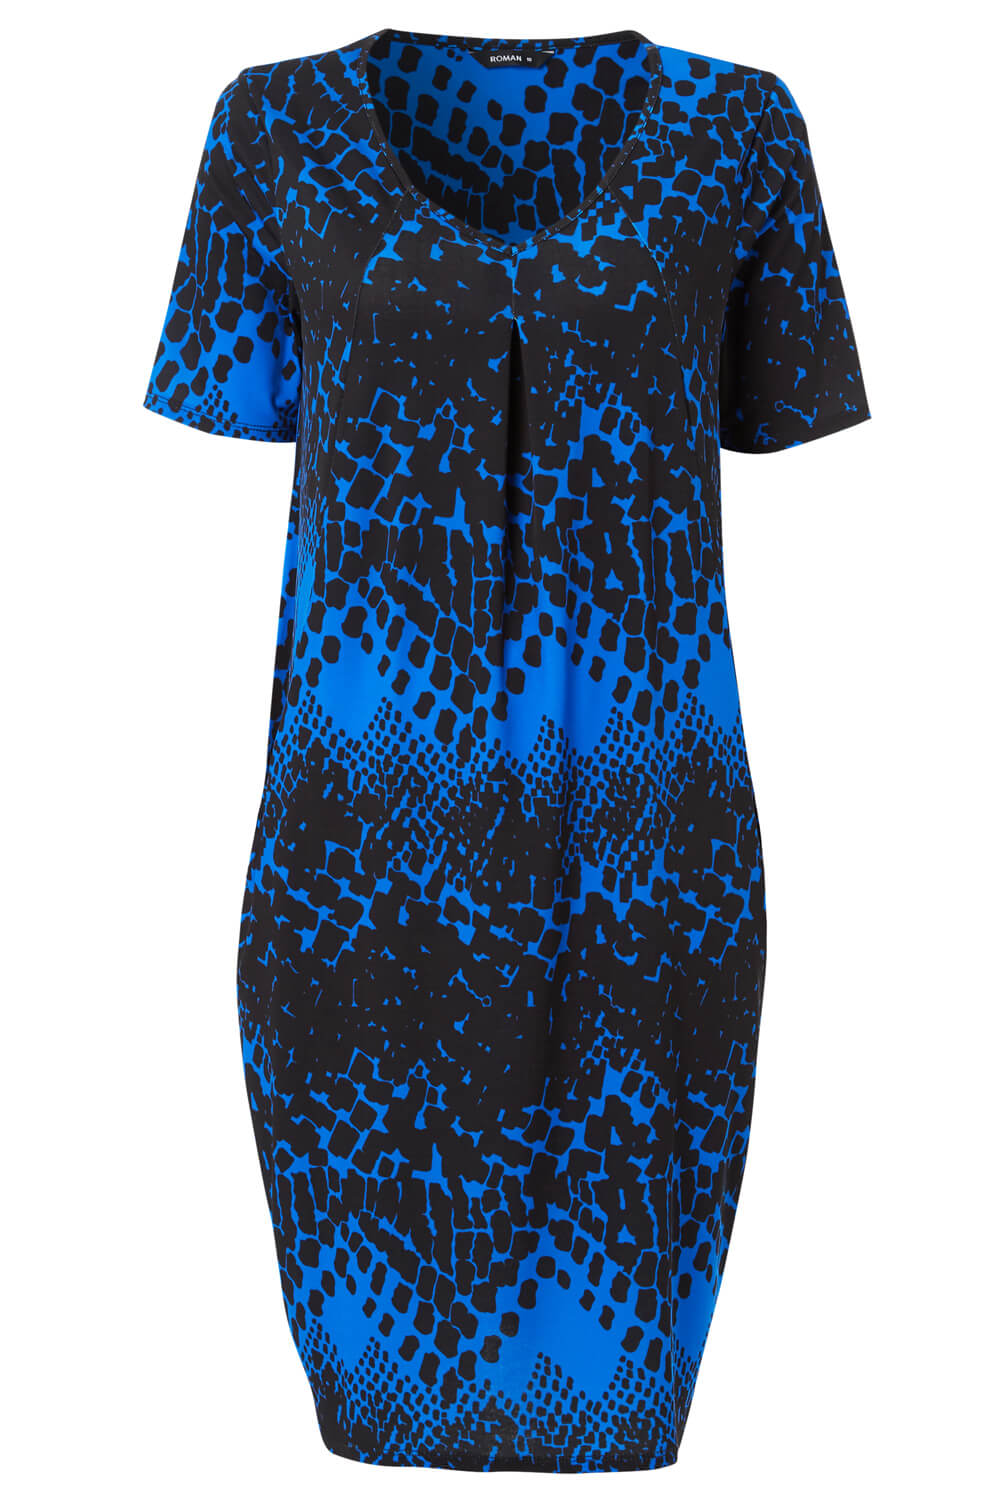 Abstract Print Cocoon Dress in Royal ...